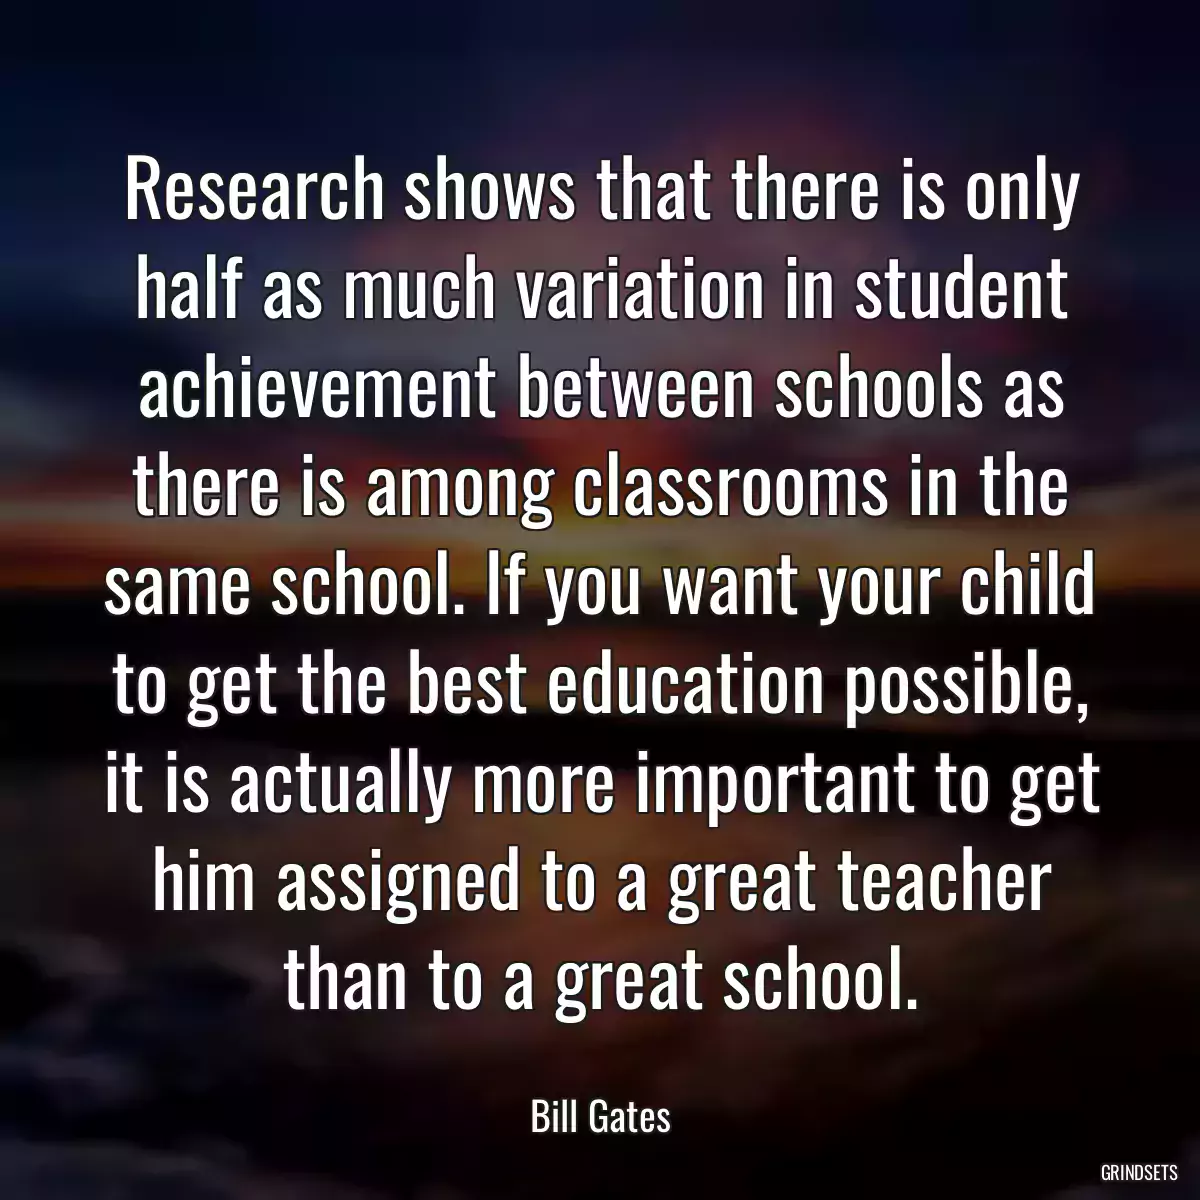 Research shows that there is only half as much variation in student achievement between schools as there is among classrooms in the same school. If you want your child to get the best education possible, it is actually more important to get him assigned to a great teacher than to a great school.